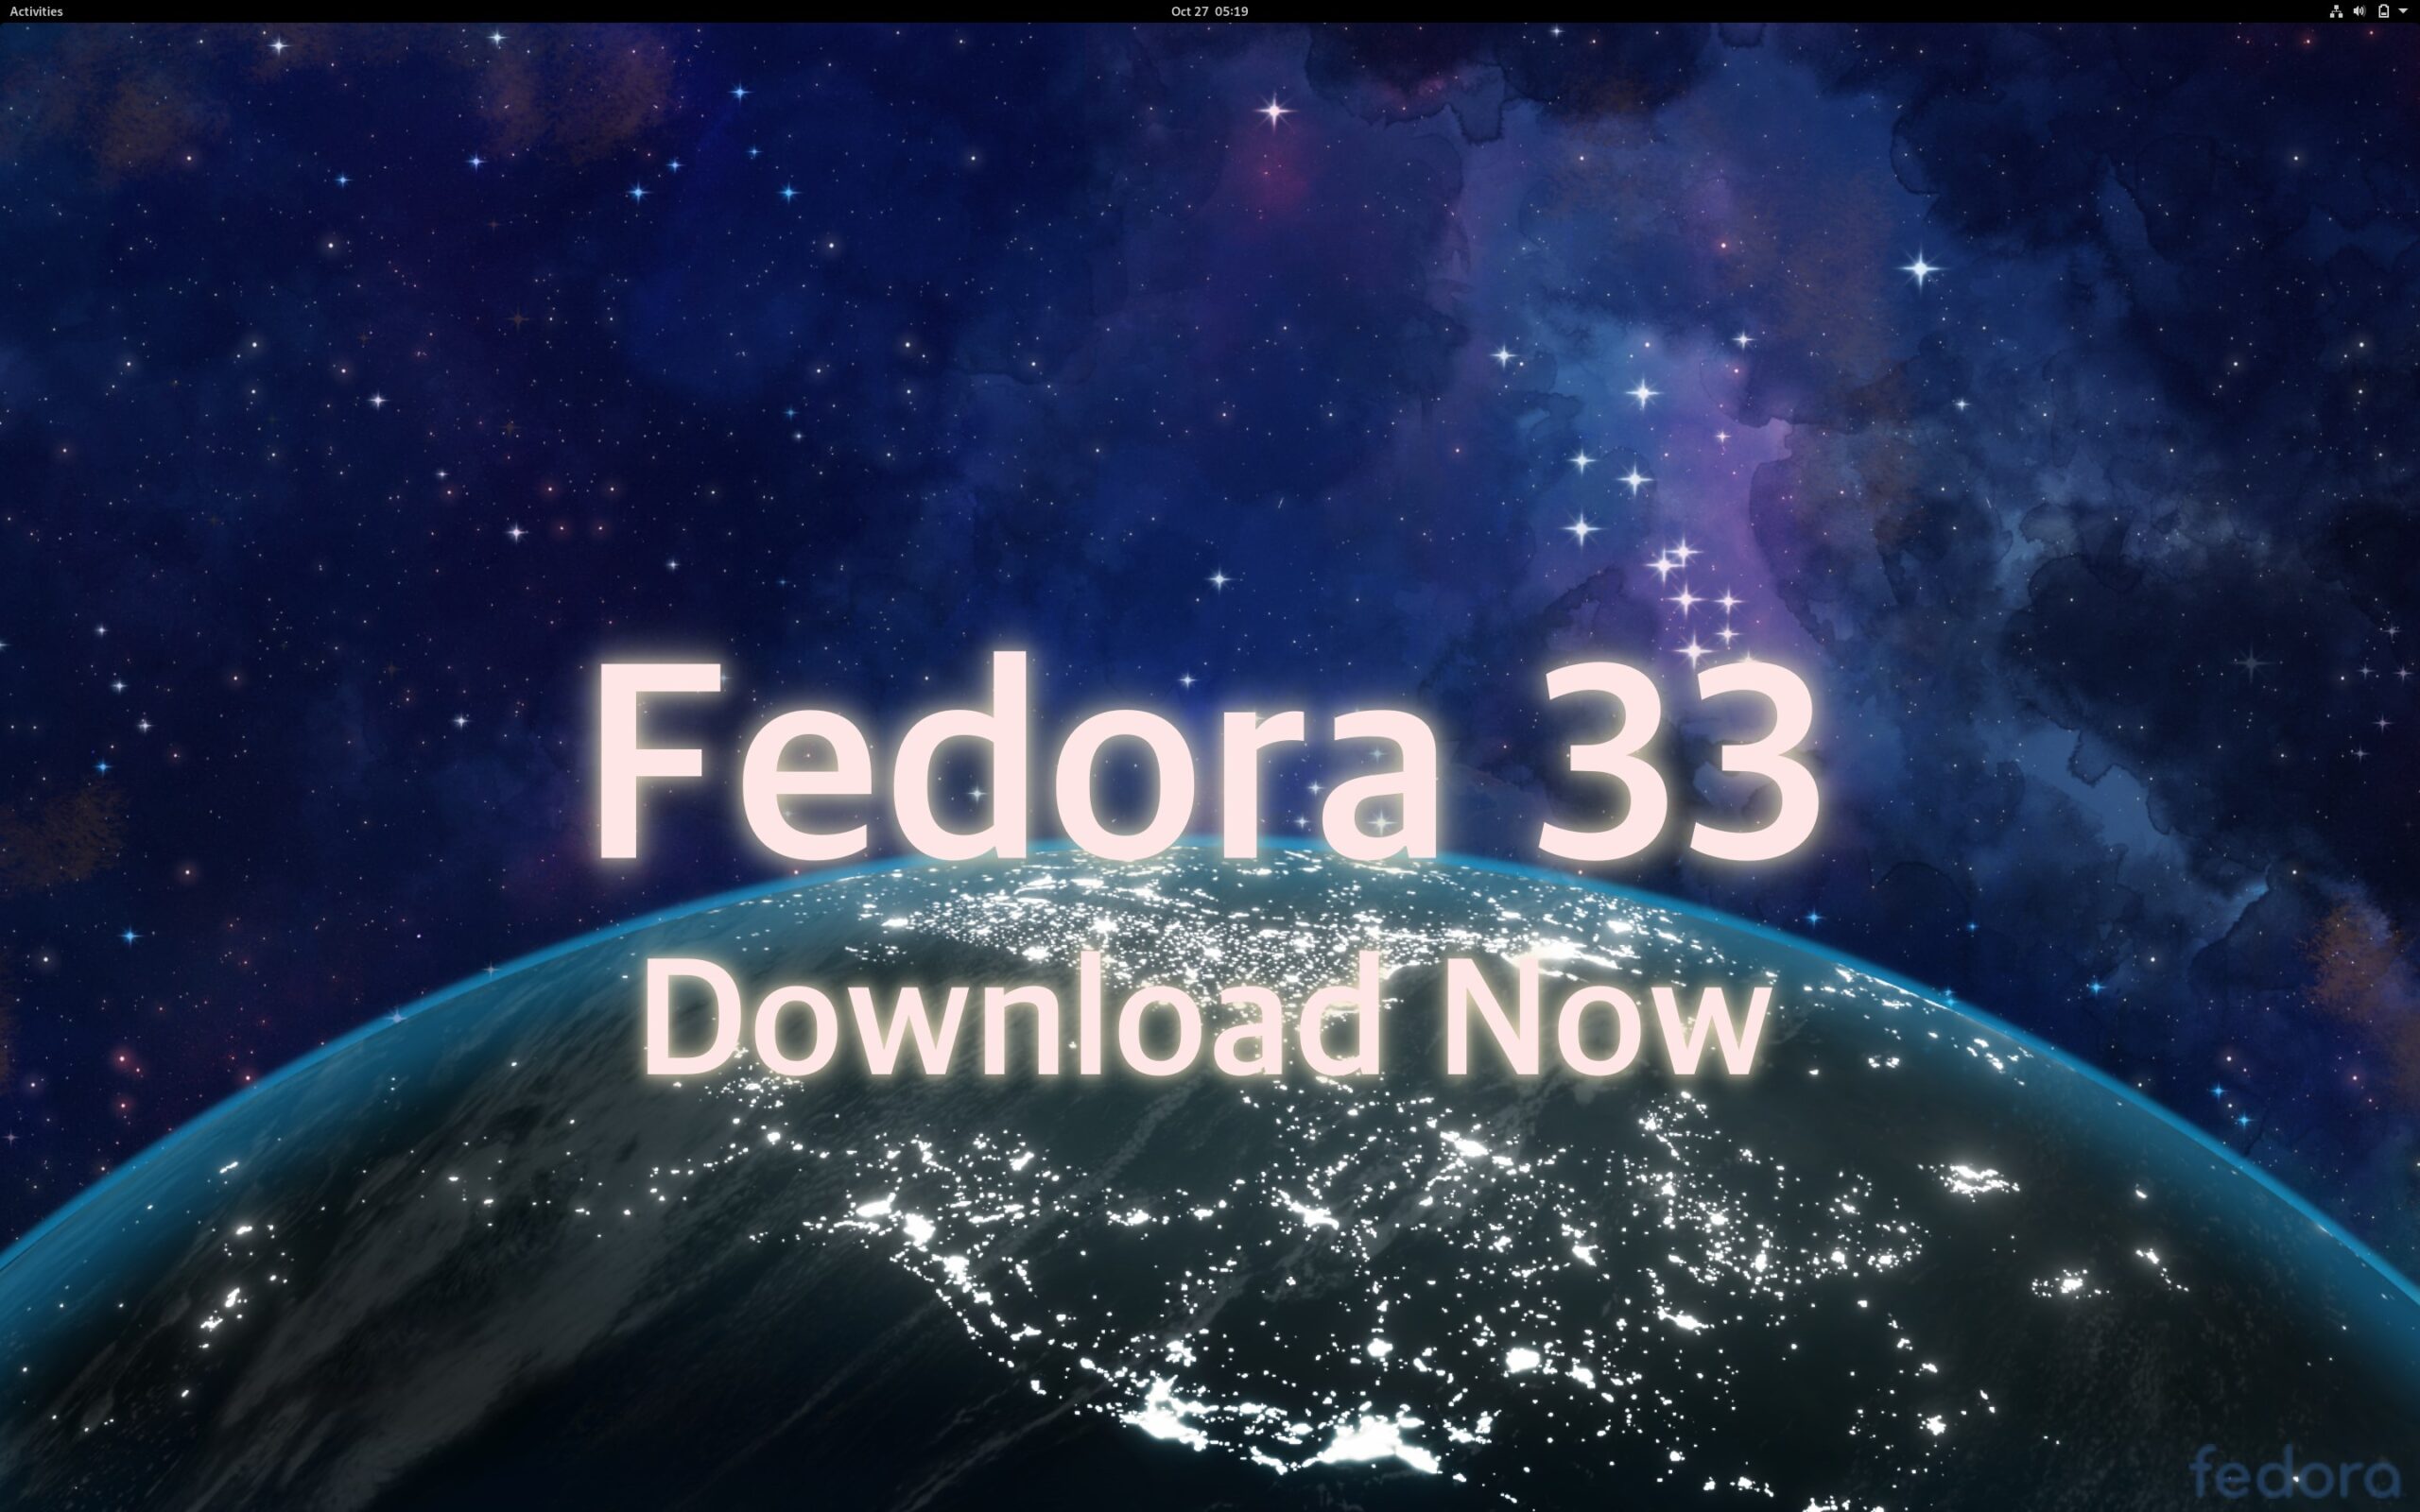 Fedora 33 Released with GNOME 3.38.1 and Linux Kernel 5.8, Btrfs as Default Filesystem